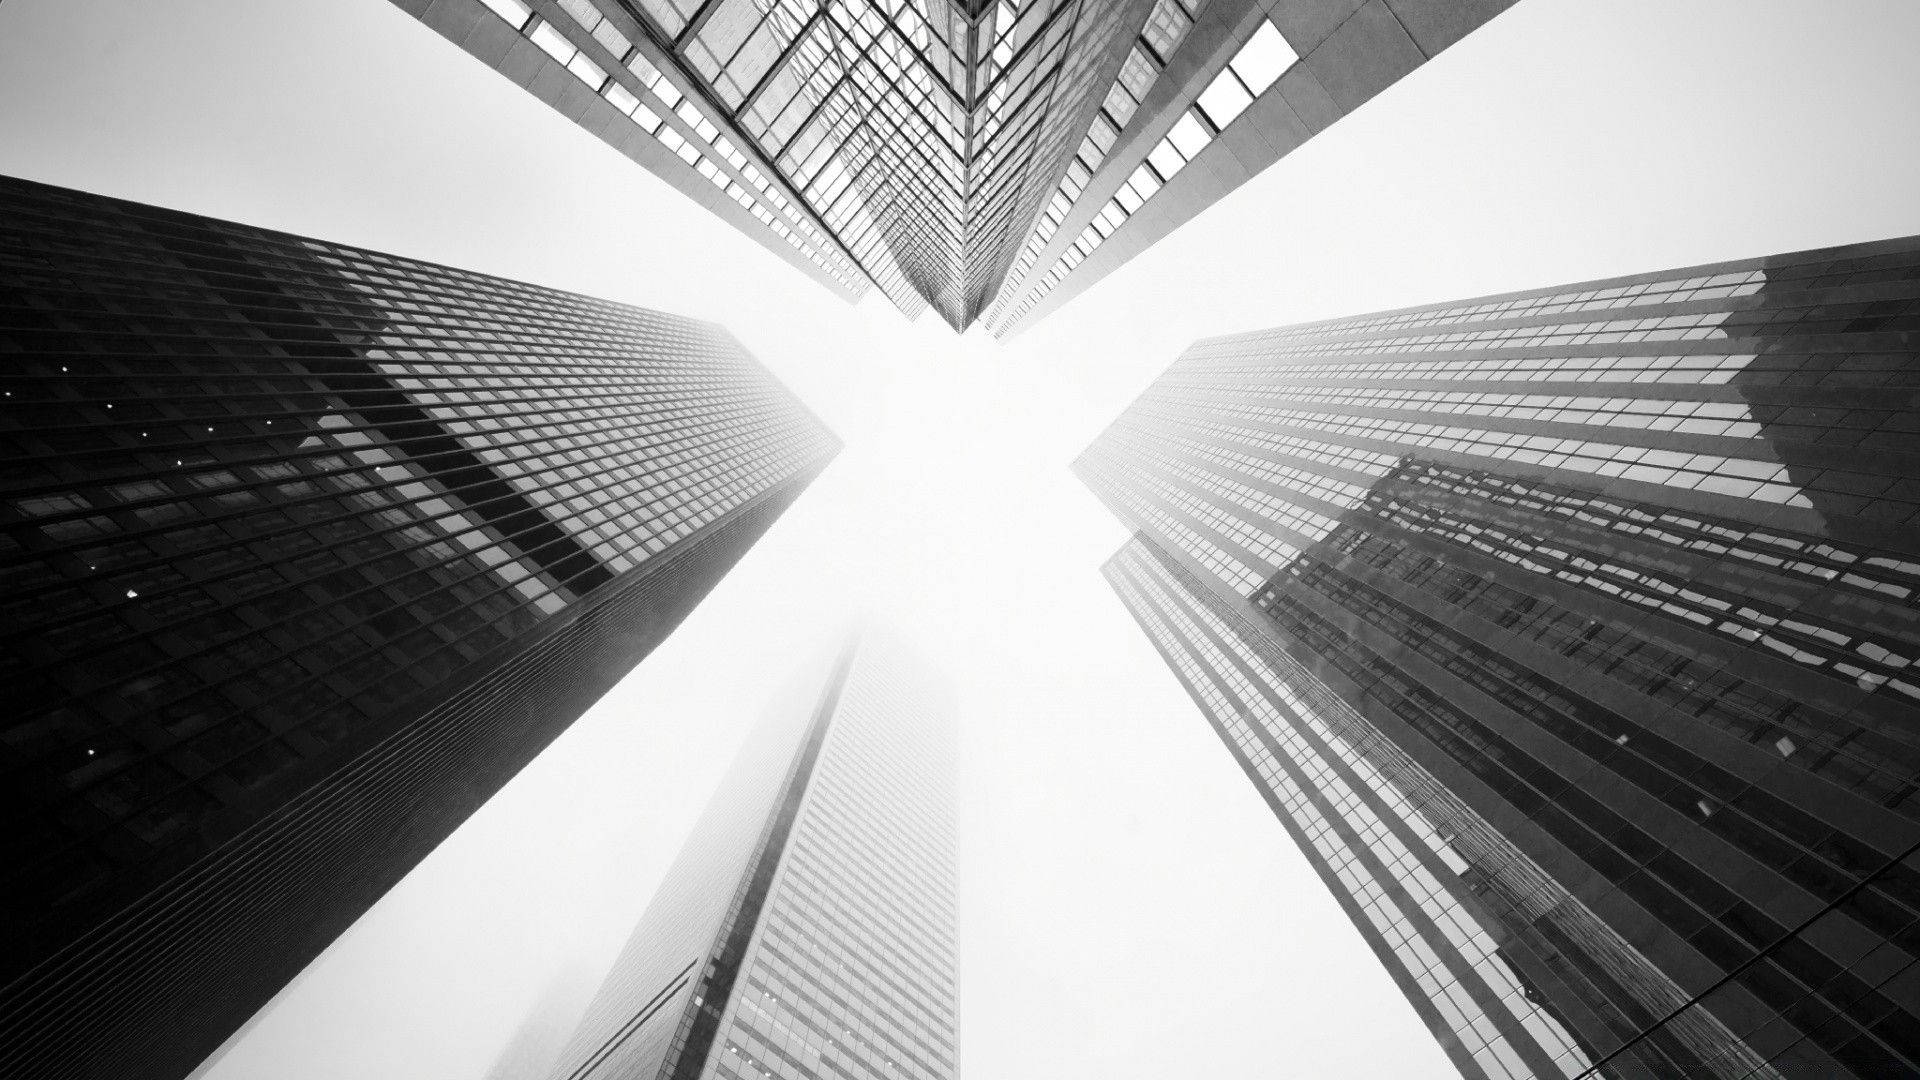 Black And White Aesthetic Skyscrapers From Below Wallpaper